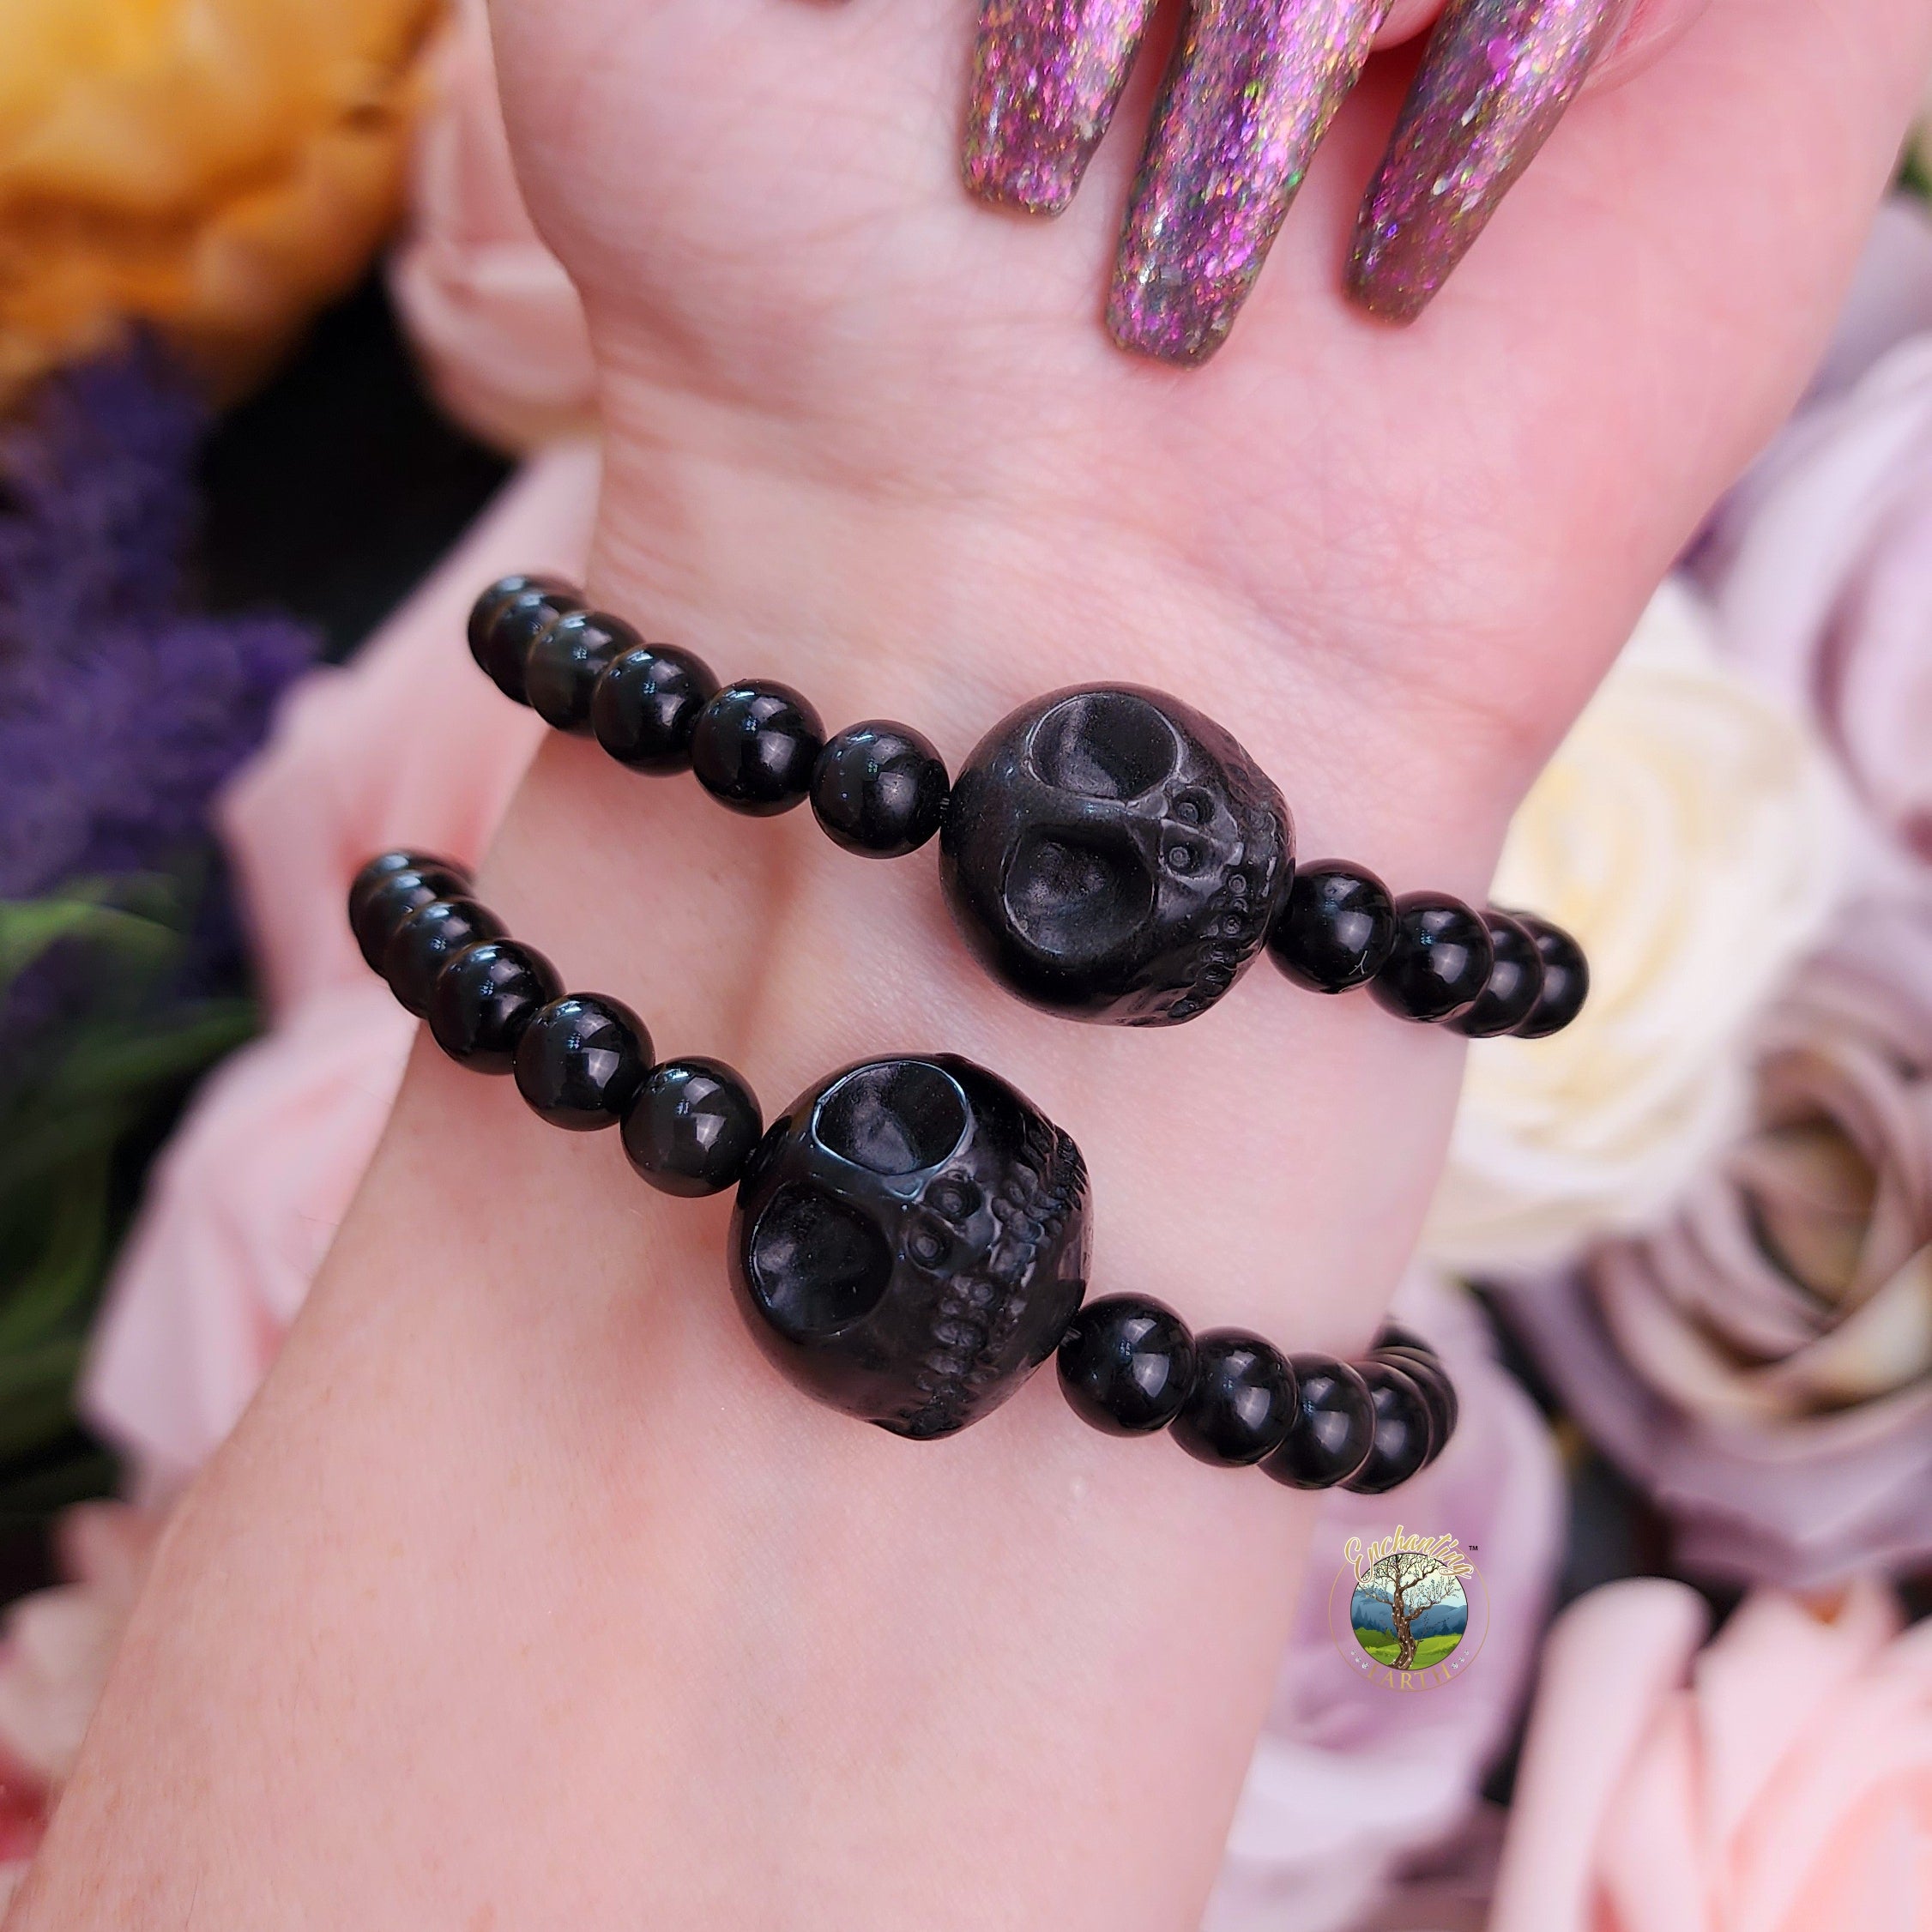 Obsidian Jack Bracelet for Grounding and Protection